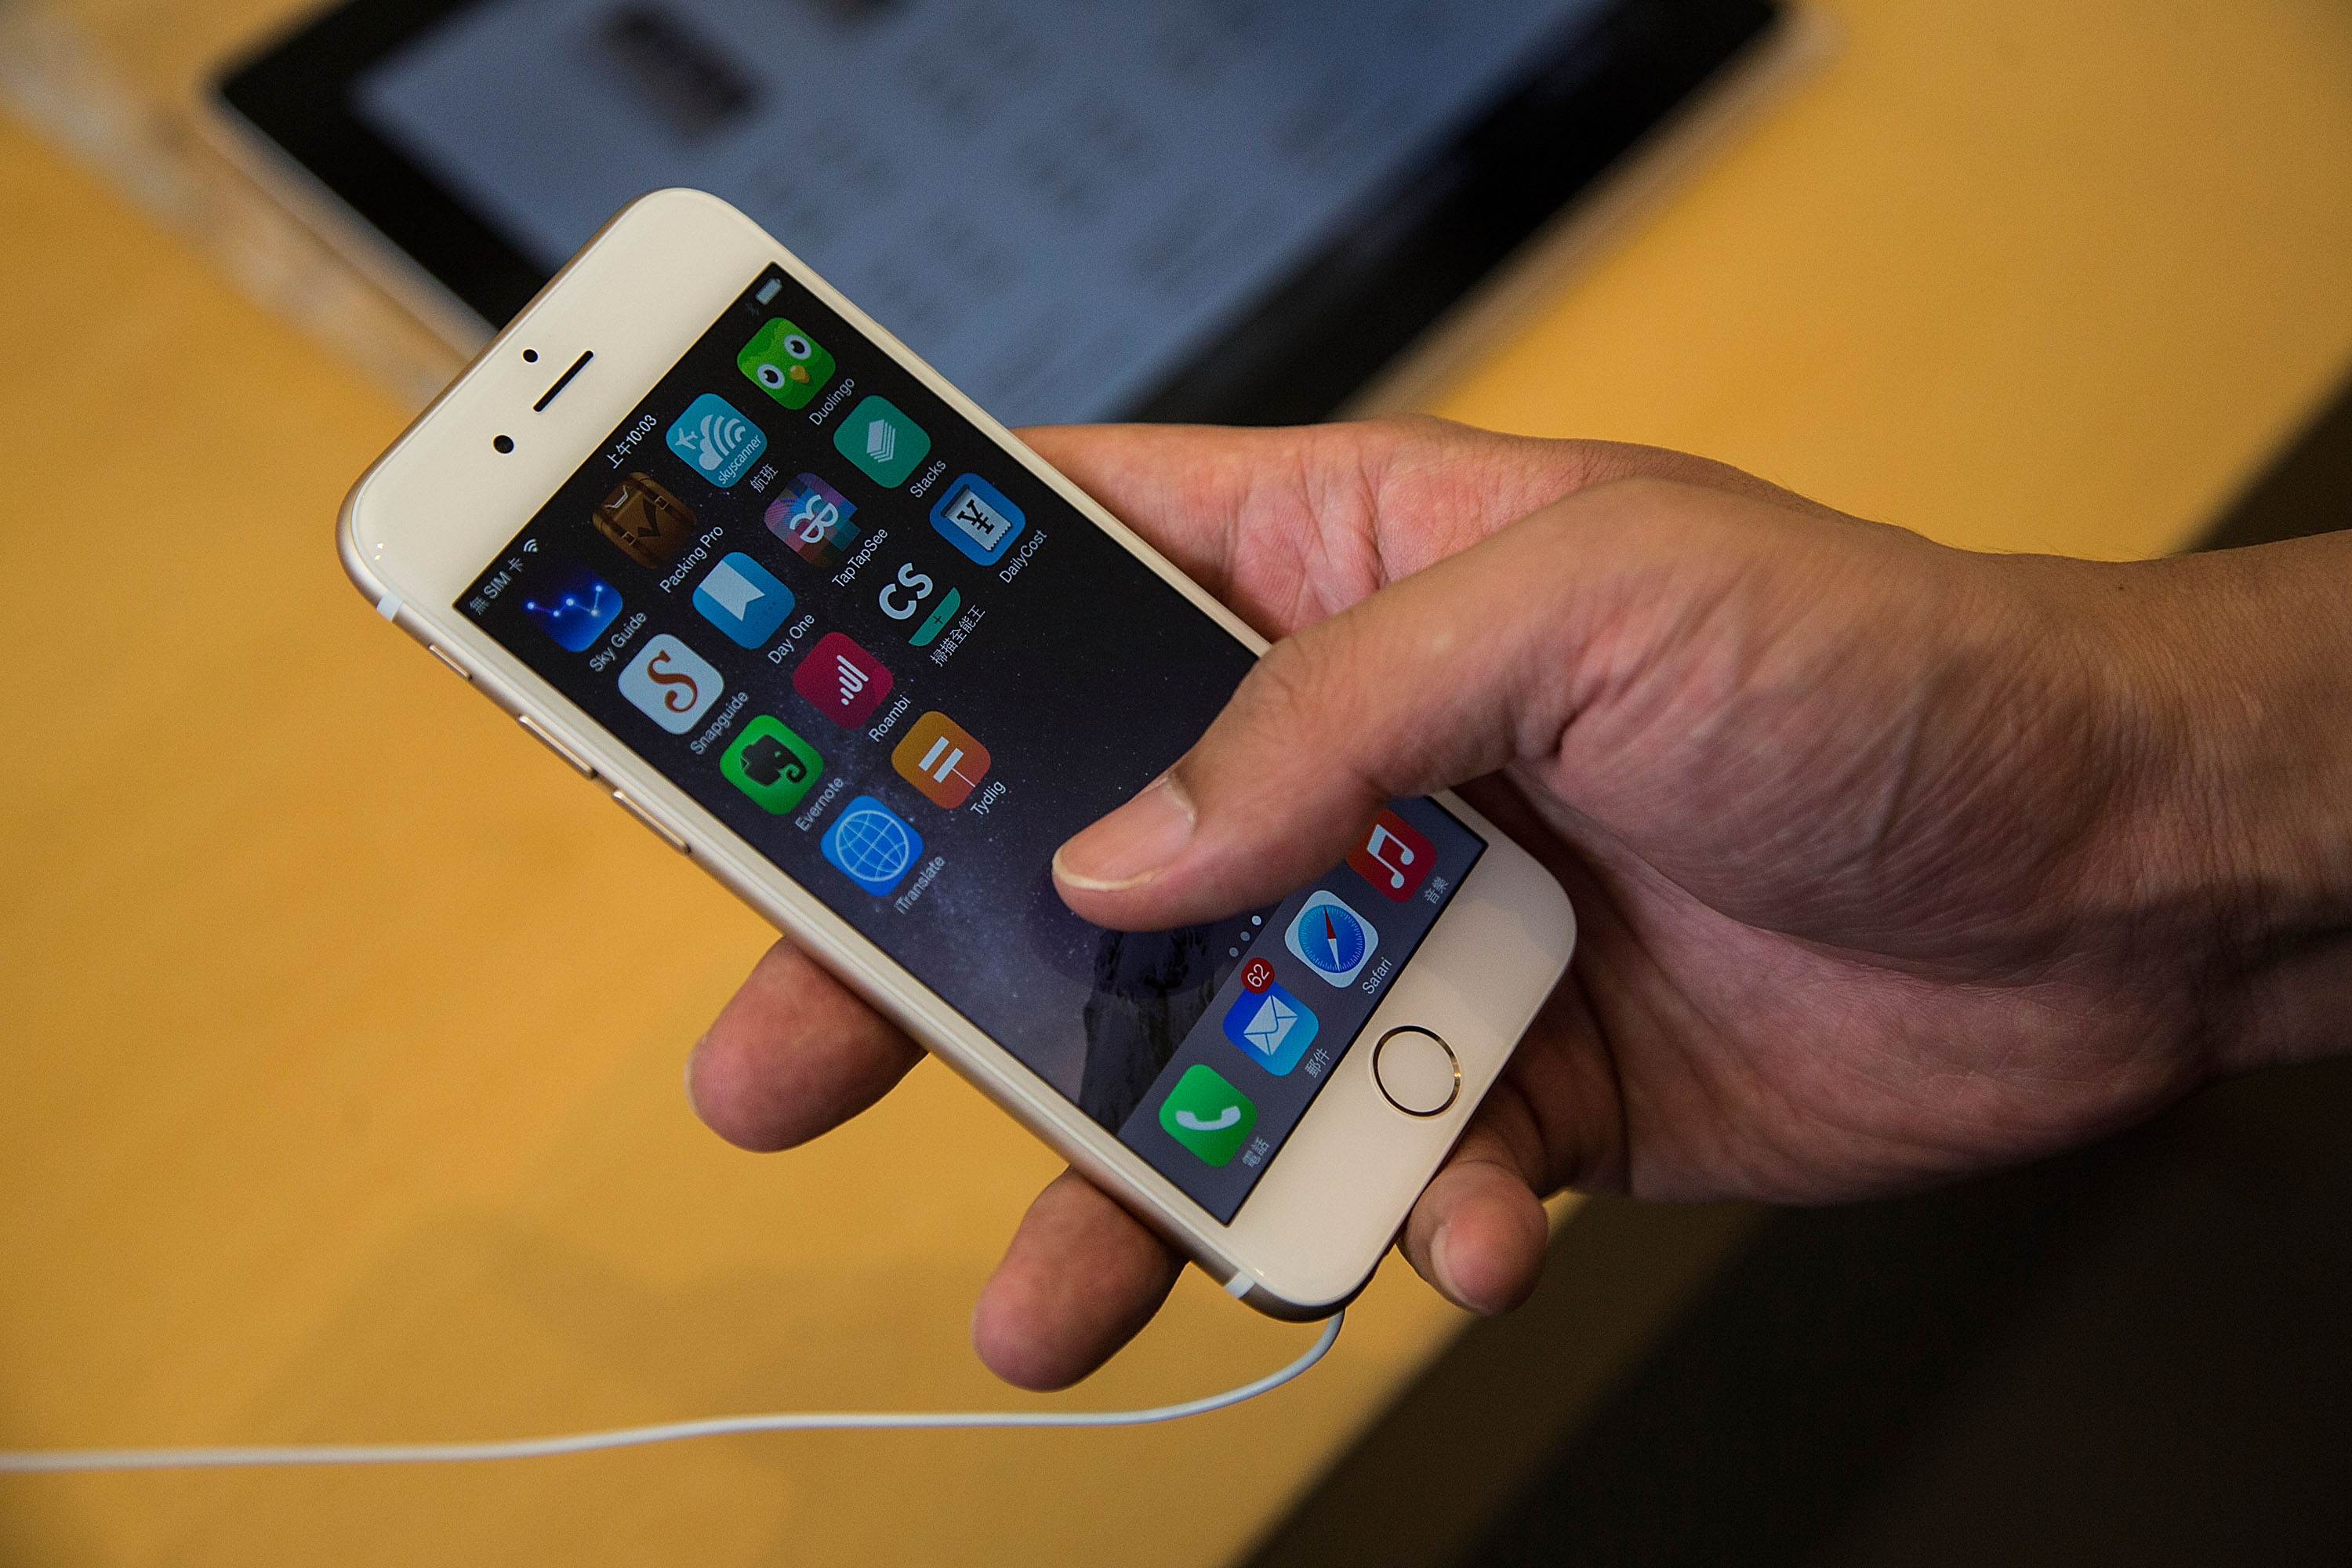 Customer looks at the new iPhones on display at the launch of the new Apple iPhone 6 and iPhone 6 Plus at the Apple IFC store on September 19, 2014 in Hong Kong, China. (Lam Yik Fei&mdash;Getty Images)